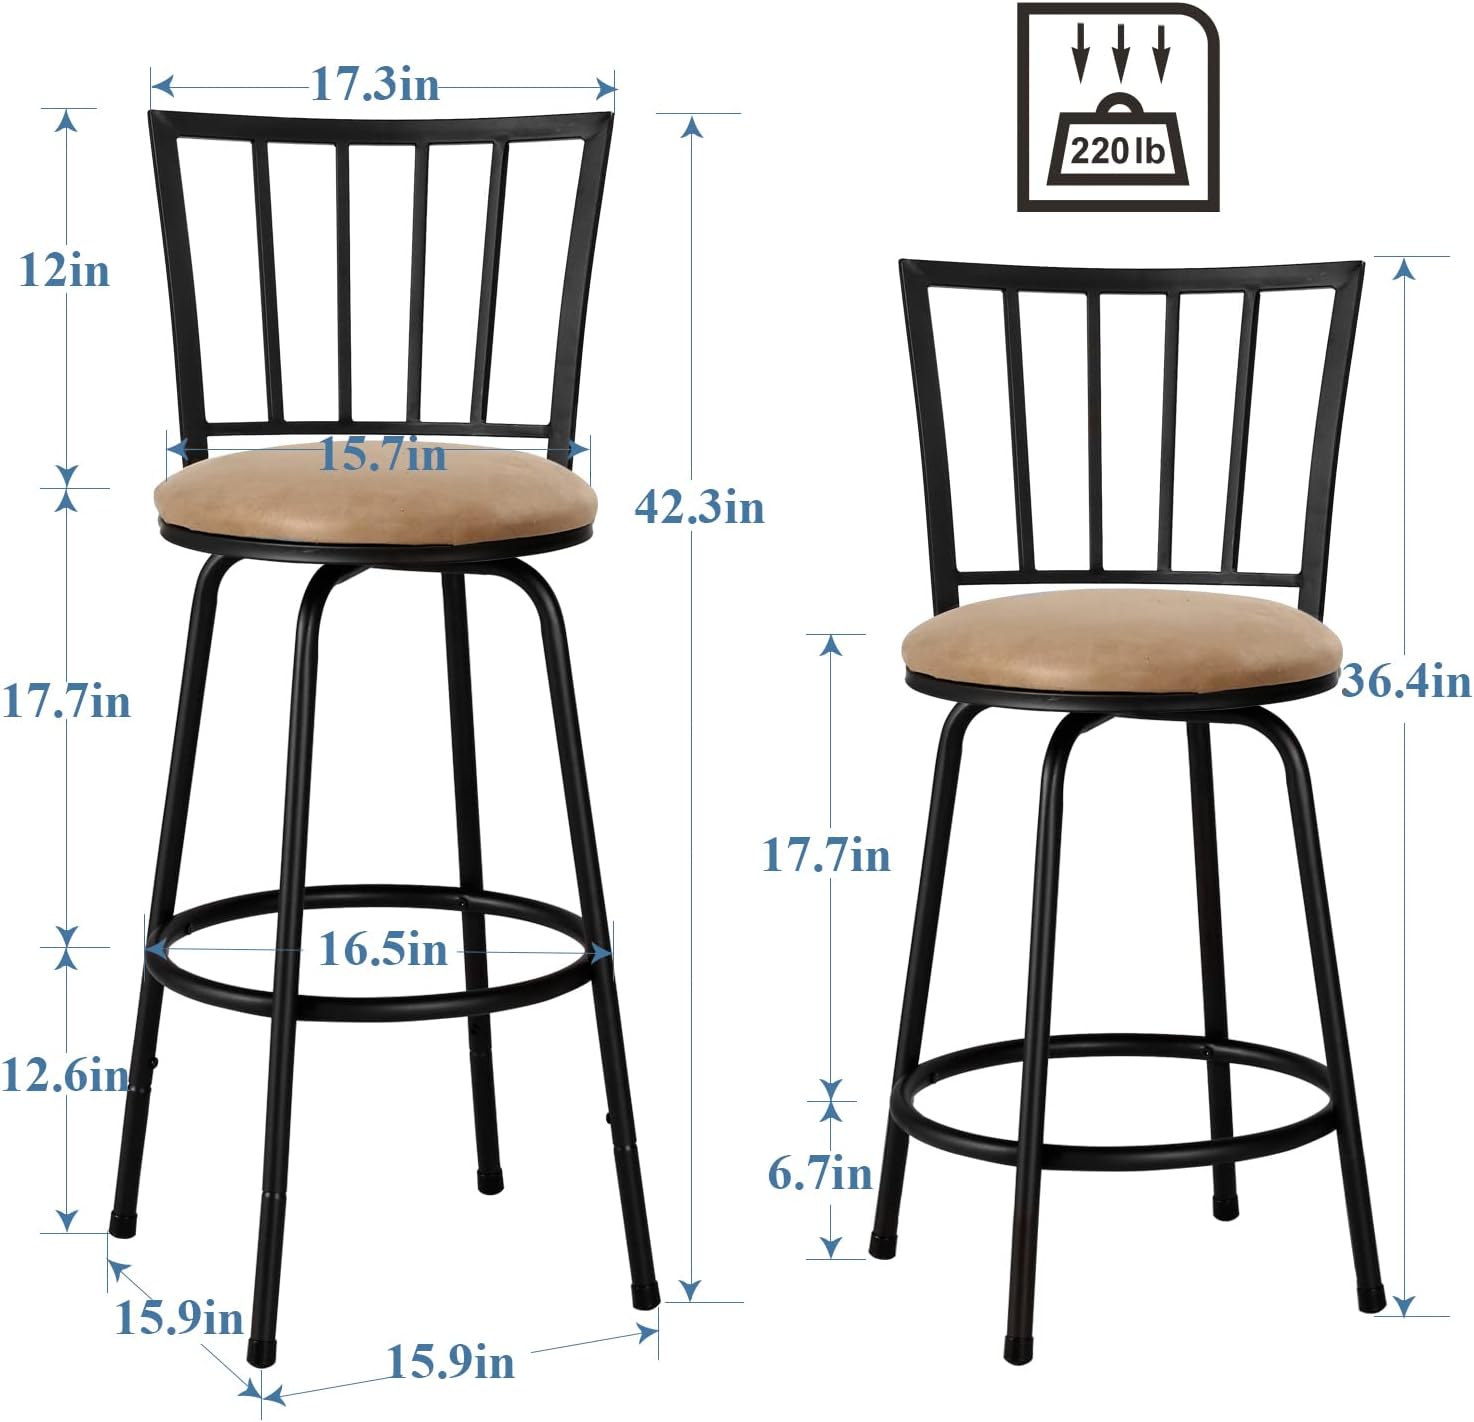 VECELO 41.5" Adjustable Bar Stools with 360 Degree Swivel Seat Top Set of 2